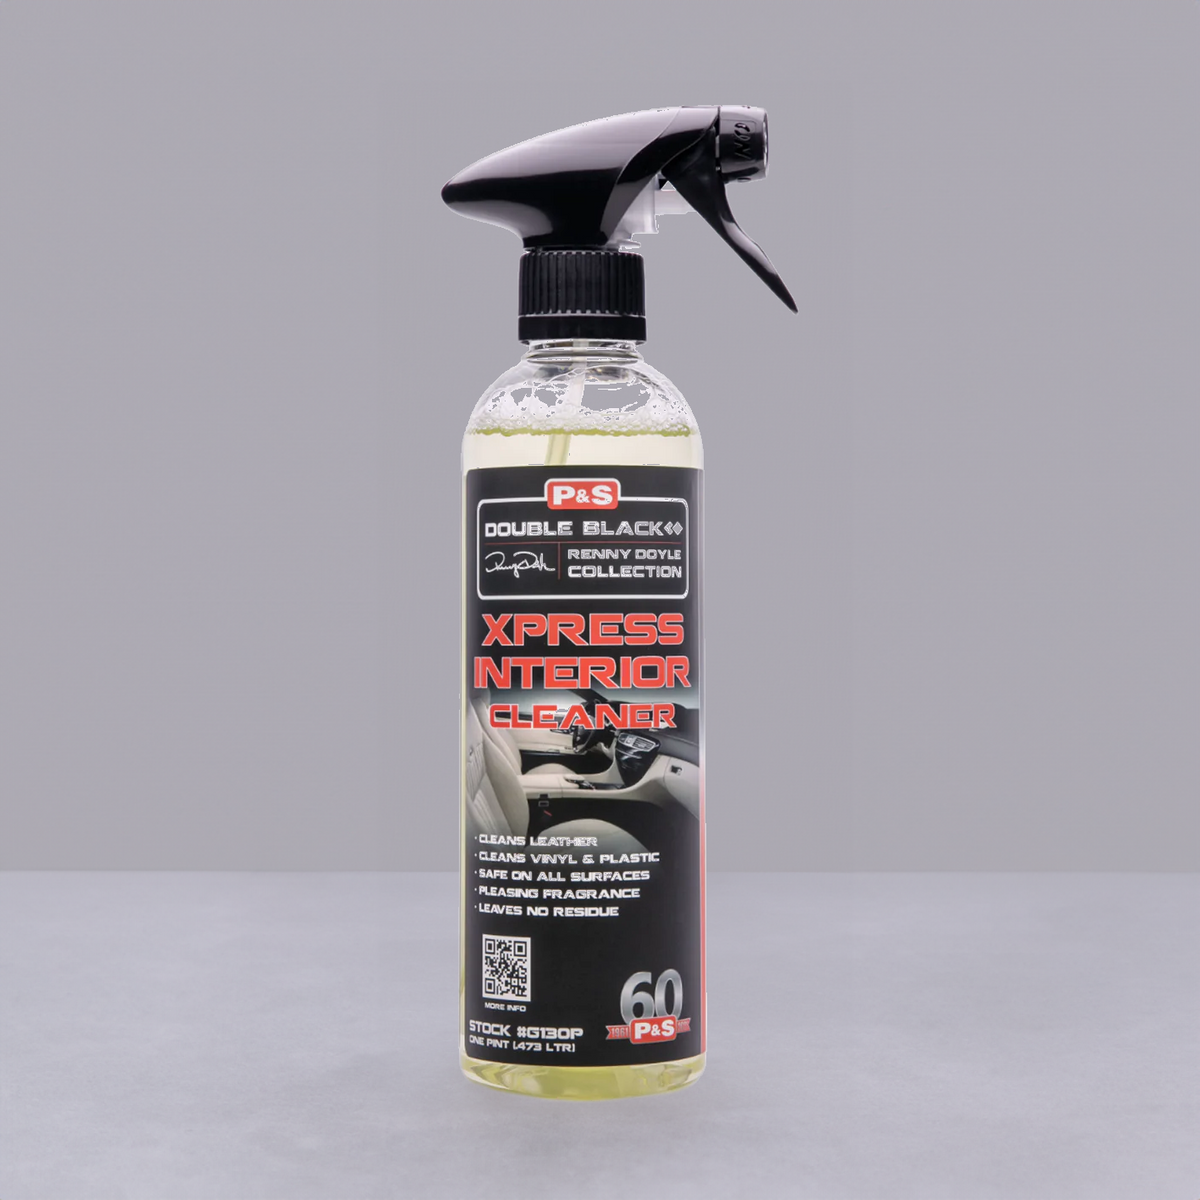 limpiador PyS express interior cleaner - Detail Oeste